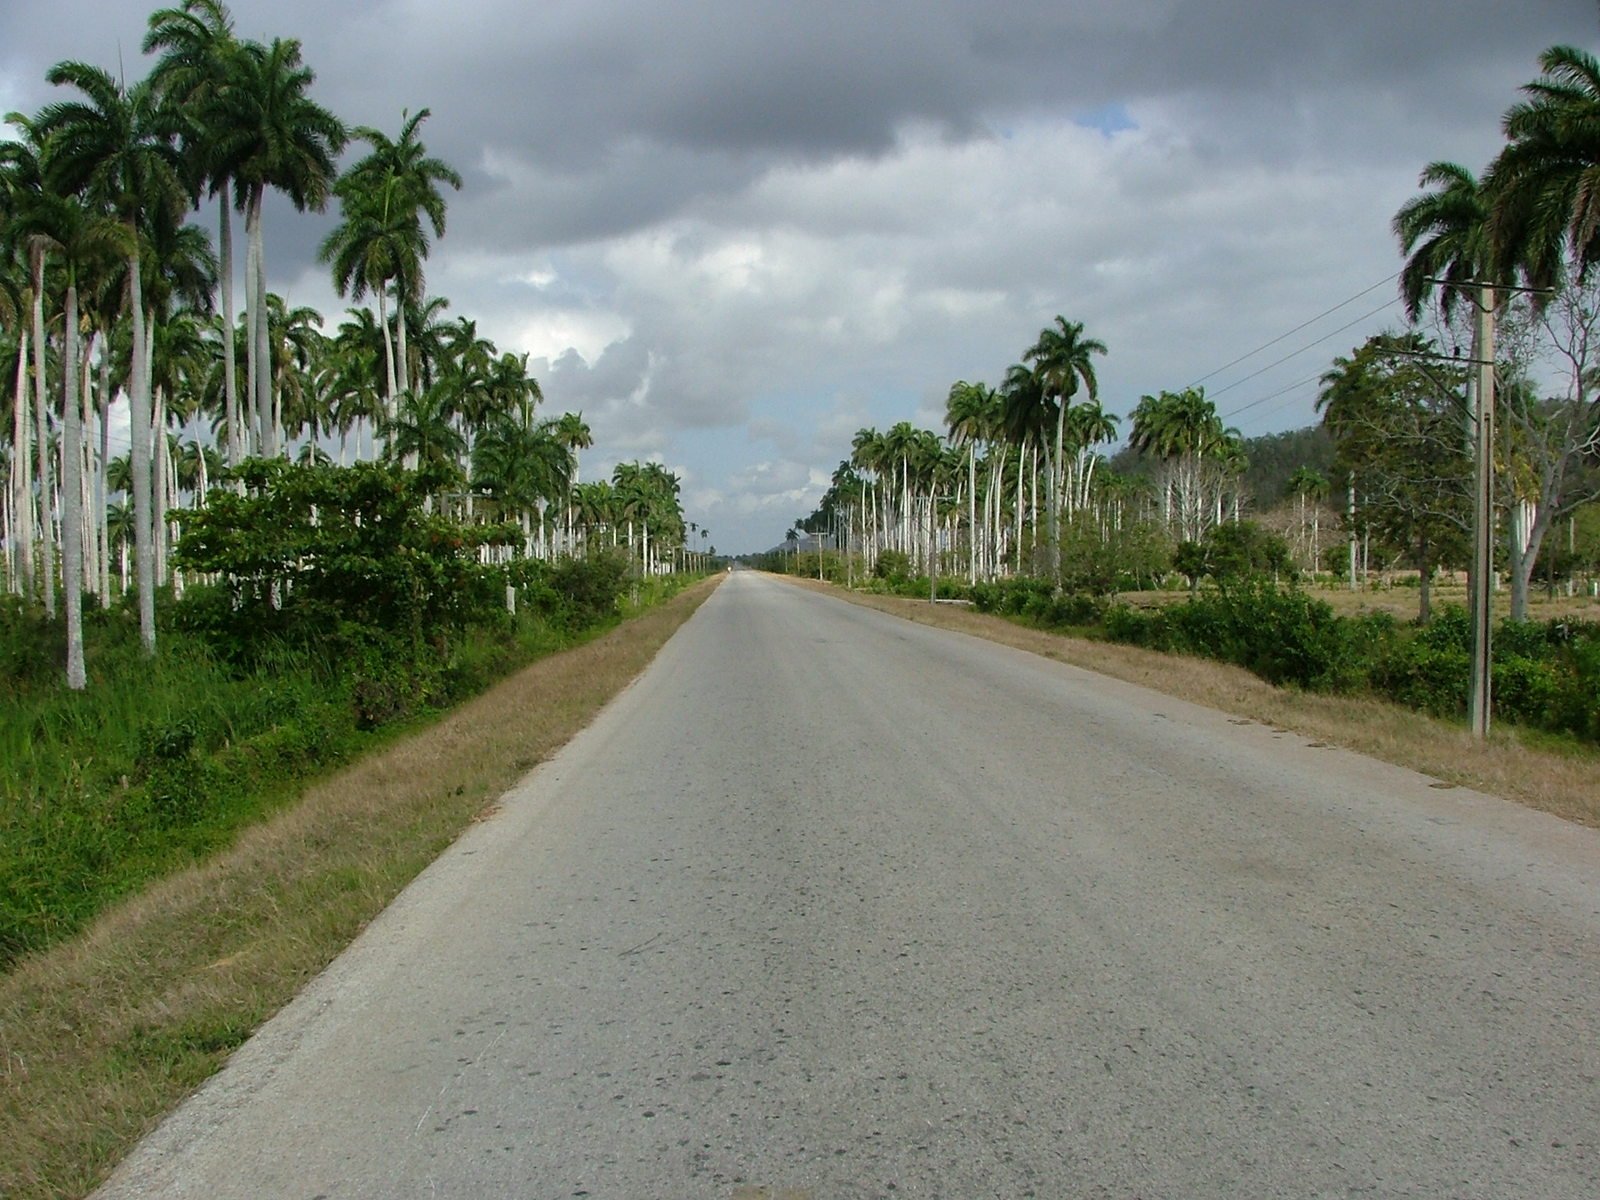 palm trees line the shoreline of a deserted country road